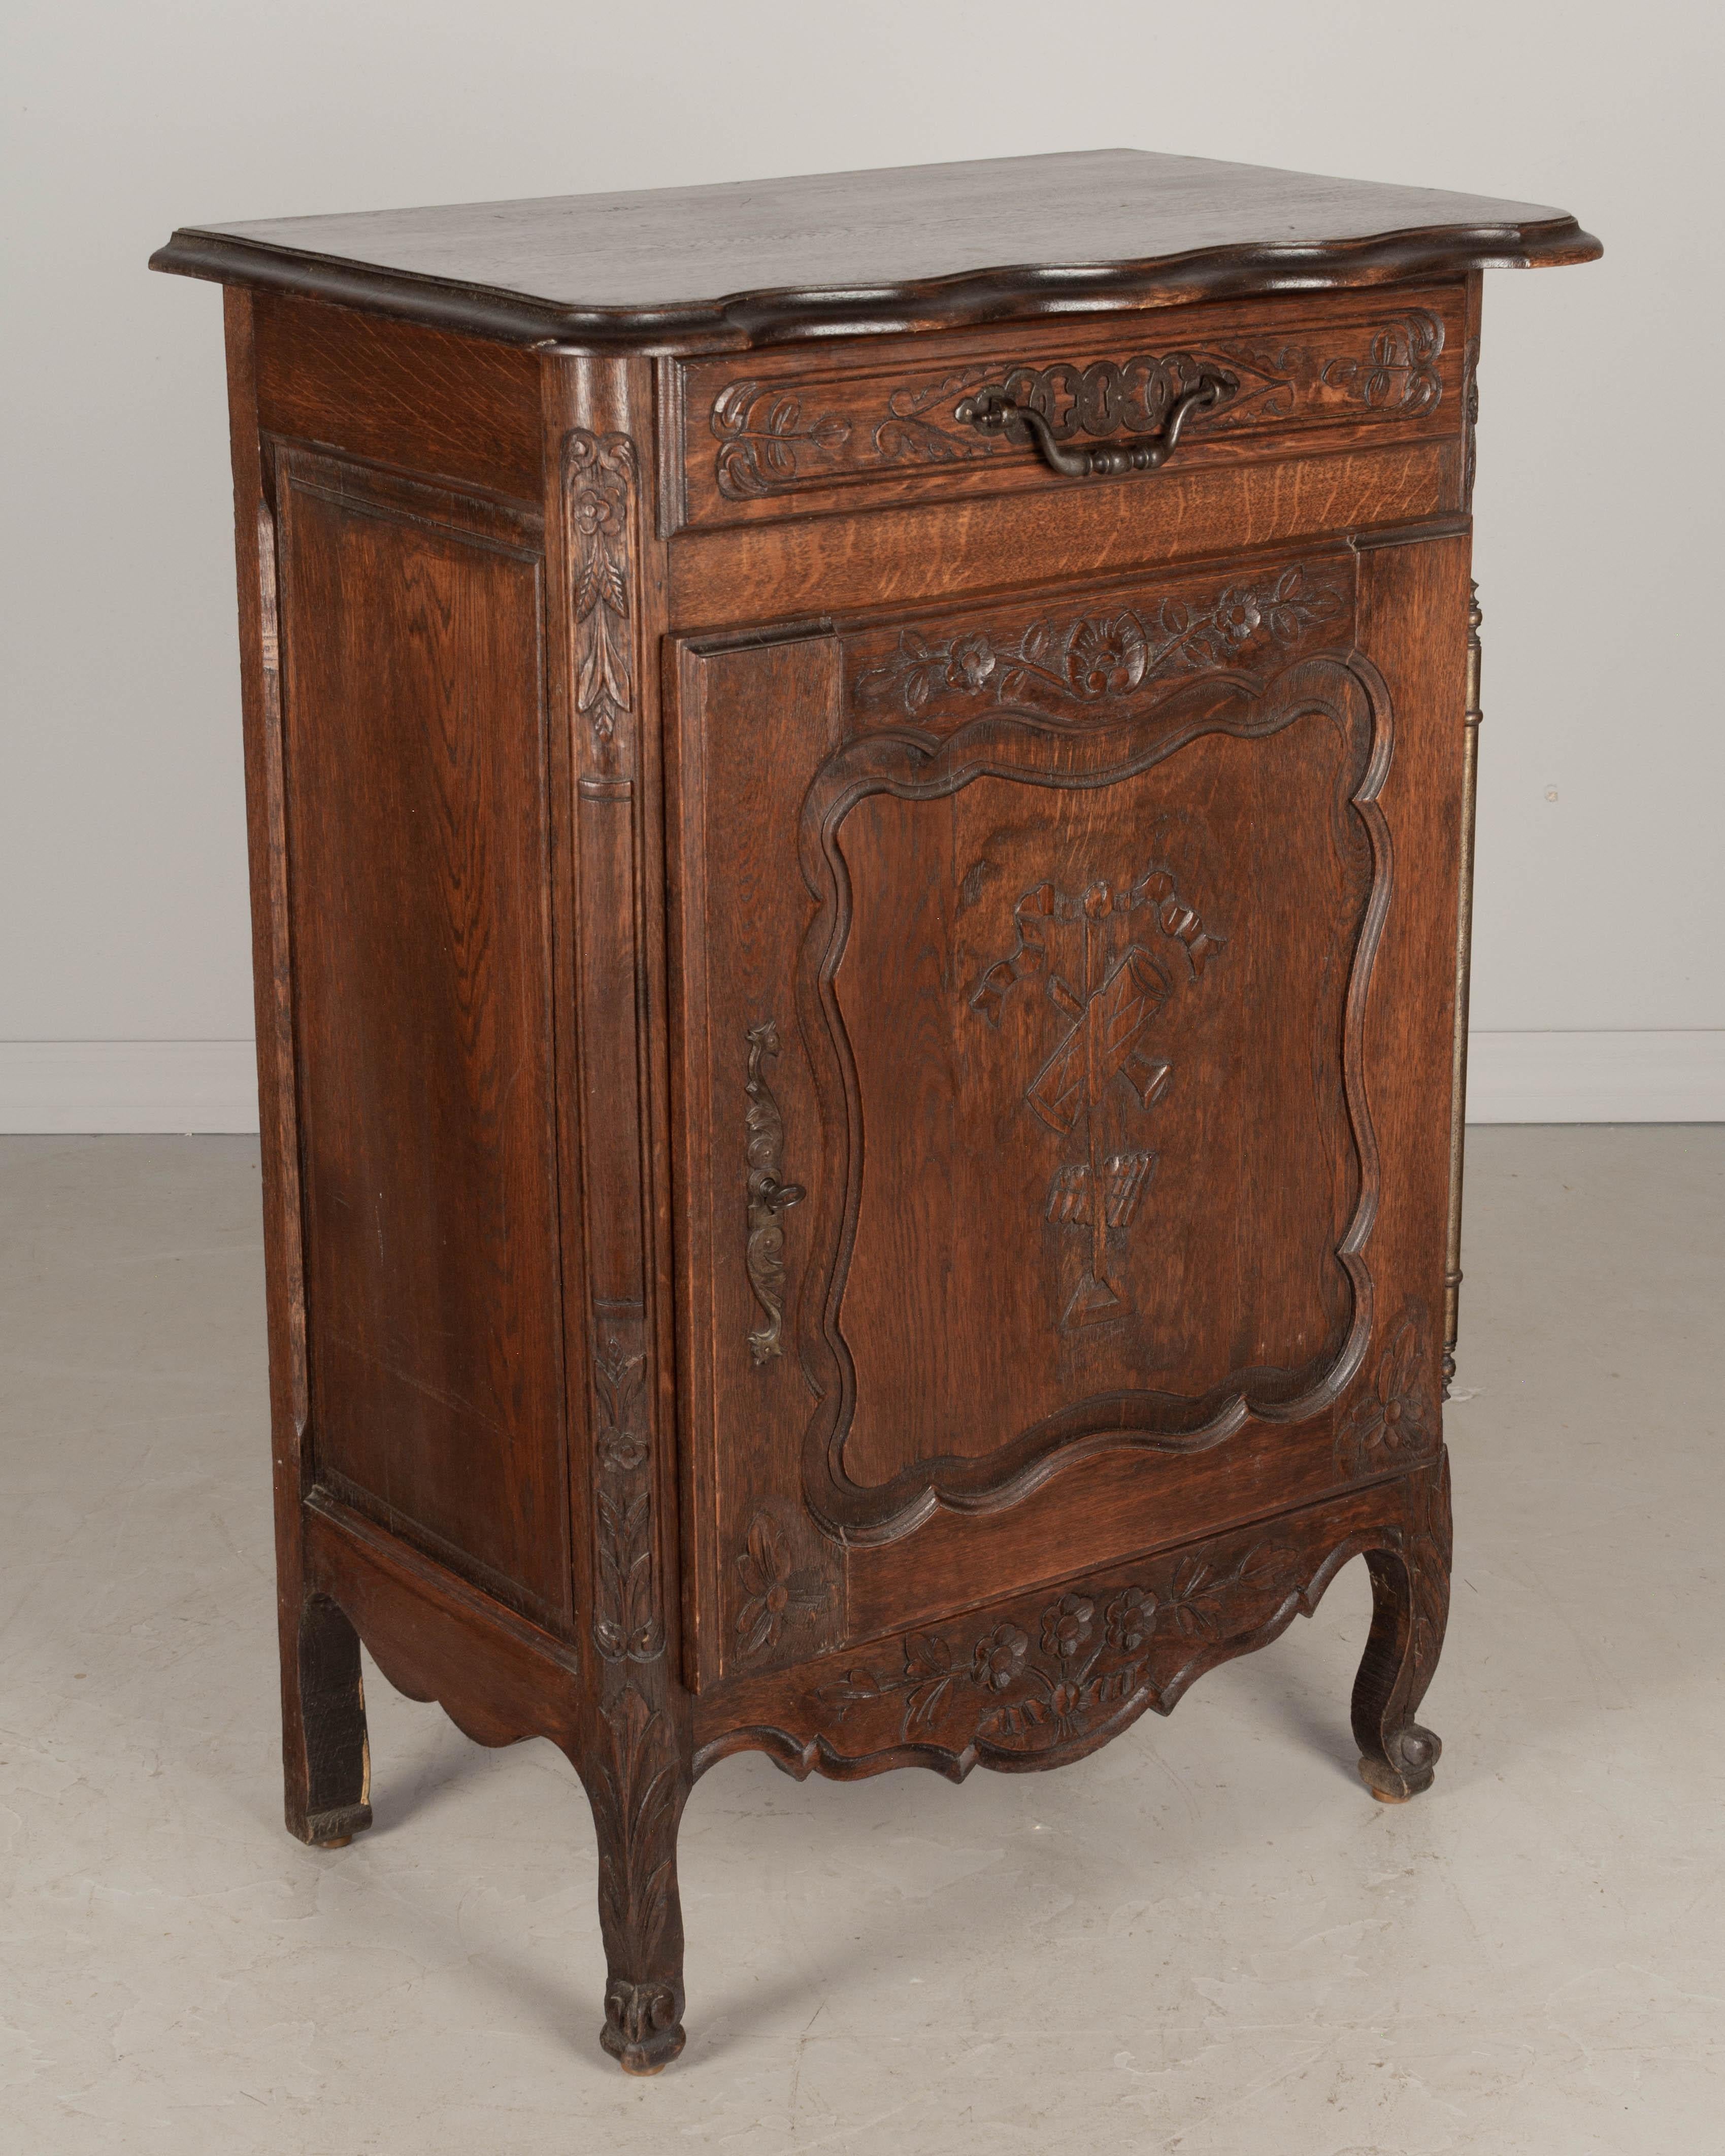 A Country French Louis XV style confiturier or single door cabinet from Normandy. Made of solid oak with hand-carved floral details on the corners and apron and musical instruments on the door. Dovetailed drawer with iron pull. Cabinet door has